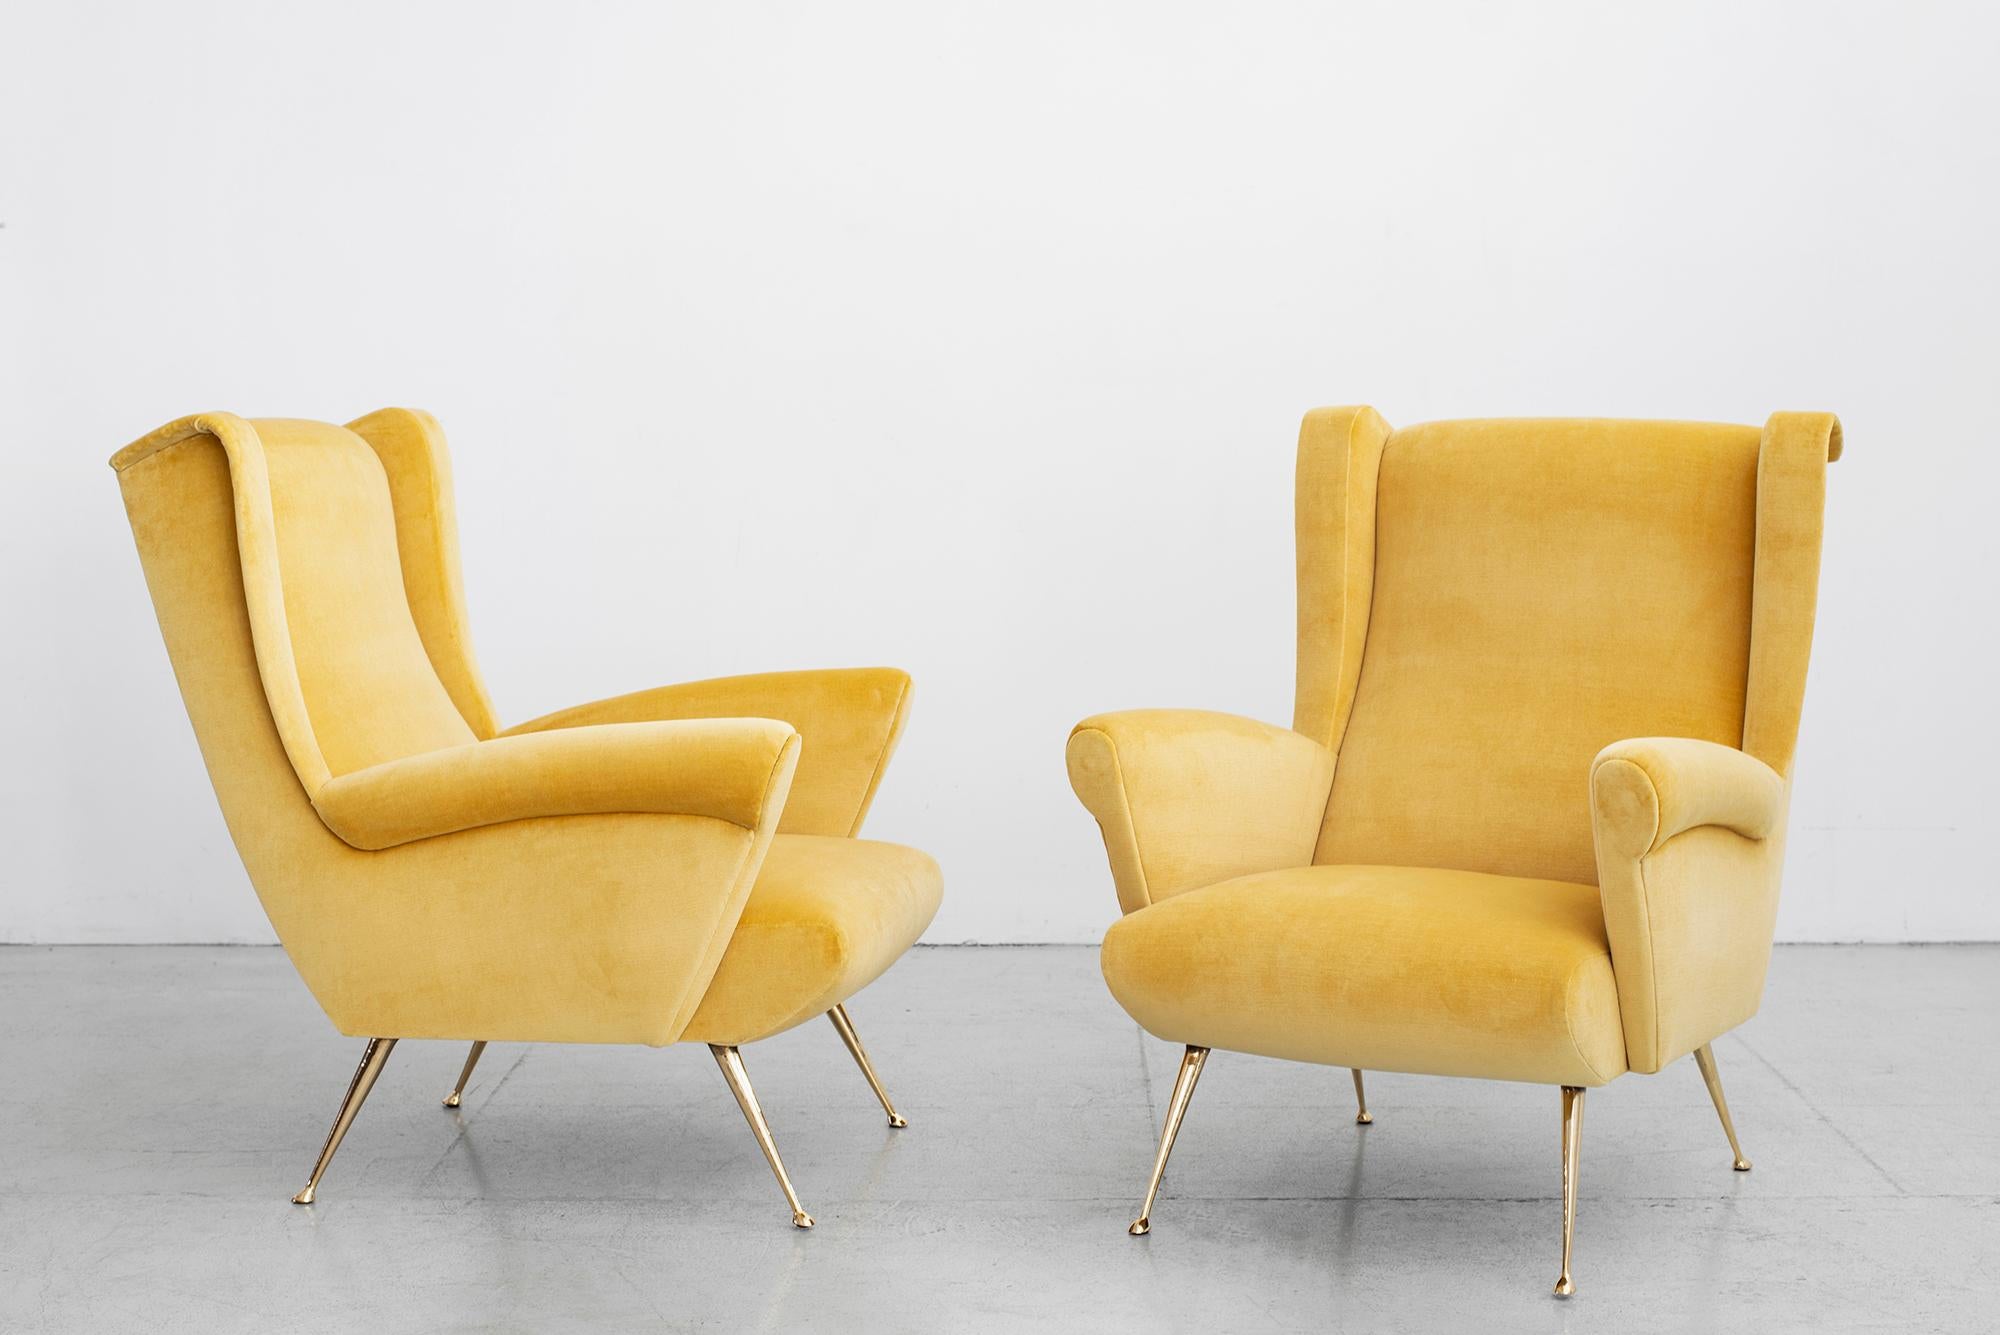 Italian pair of club chairs in the style of Gio Ponti with wingback arm and angular shape.
Brass legs - reupholstered in beautiful lemon yellow velvet.
Polished brass tapered legs.
 